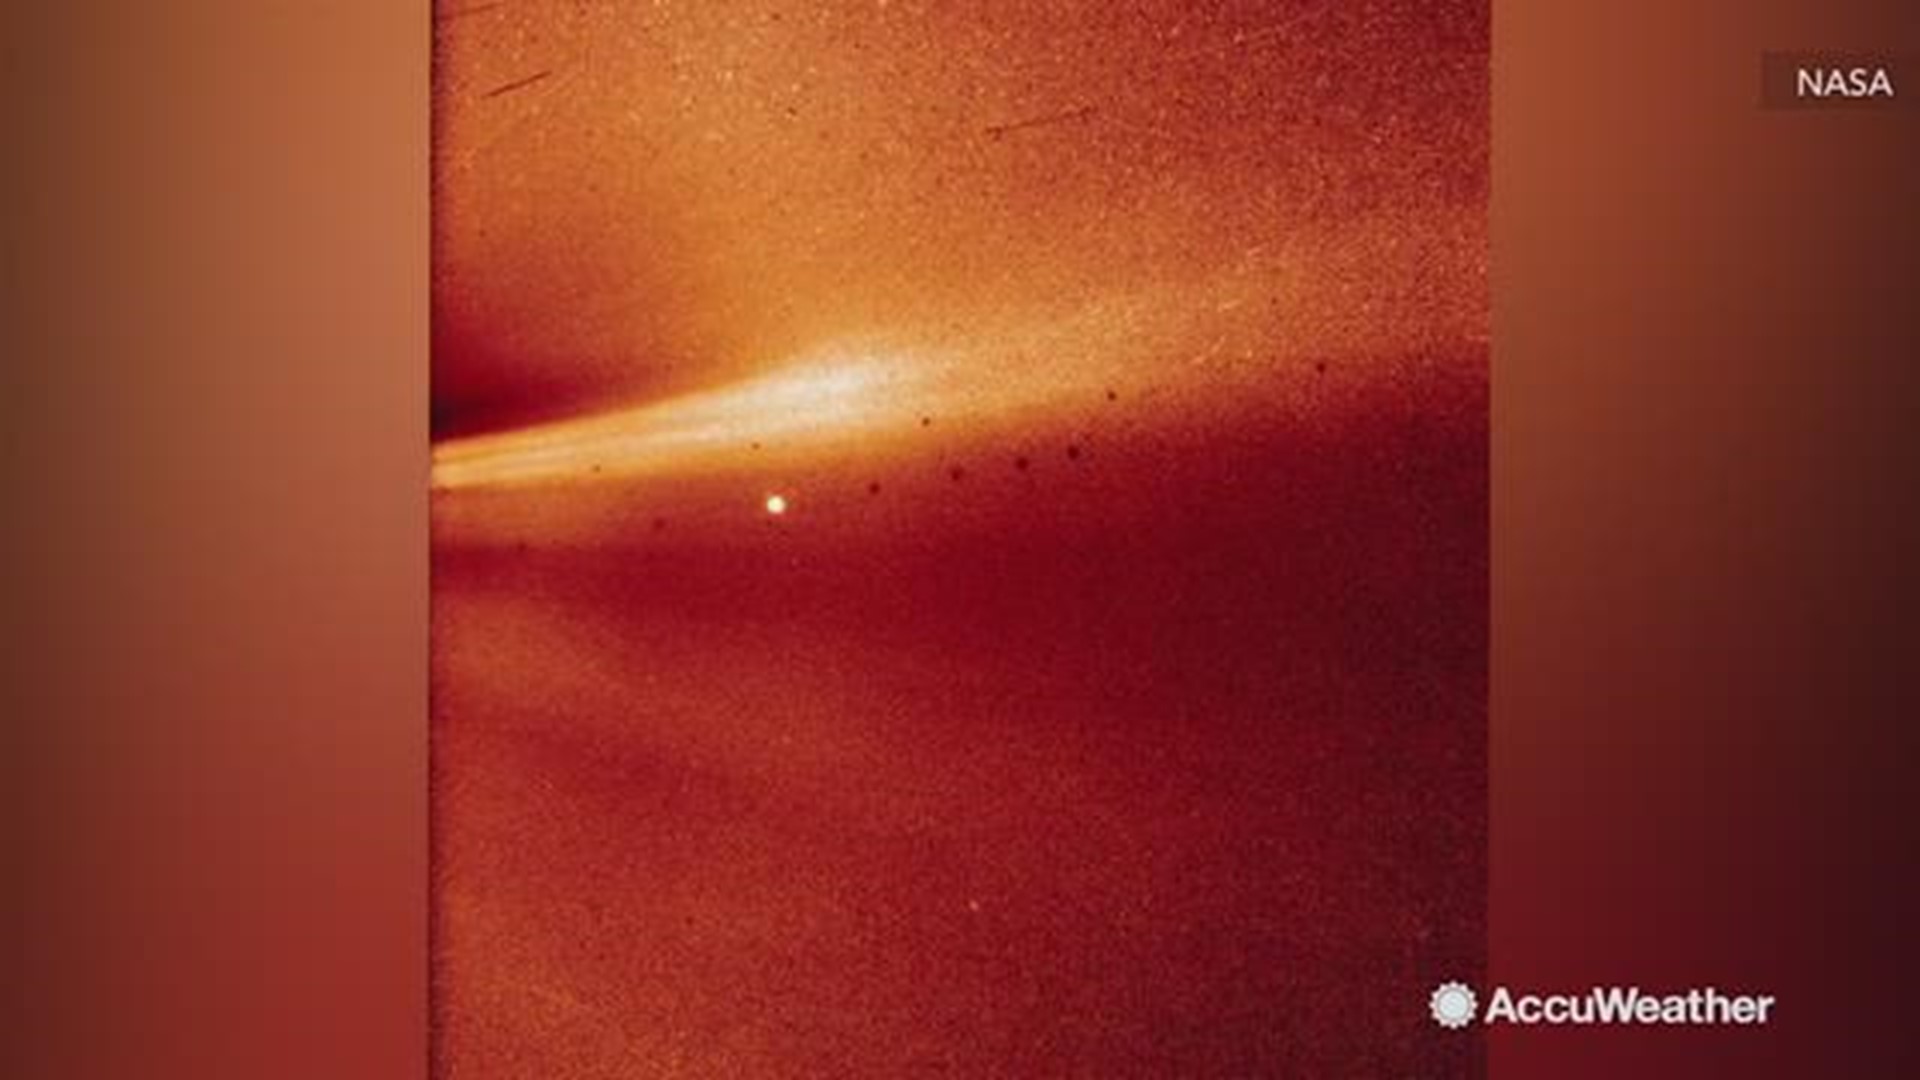 This photo, taken on November 8th, was shot in the Sun's atmosphere by the Parker Solar Probe. NASA says this photo was taken about 16.9 million miles from the Sun's surface. It's the first photo of its kind.